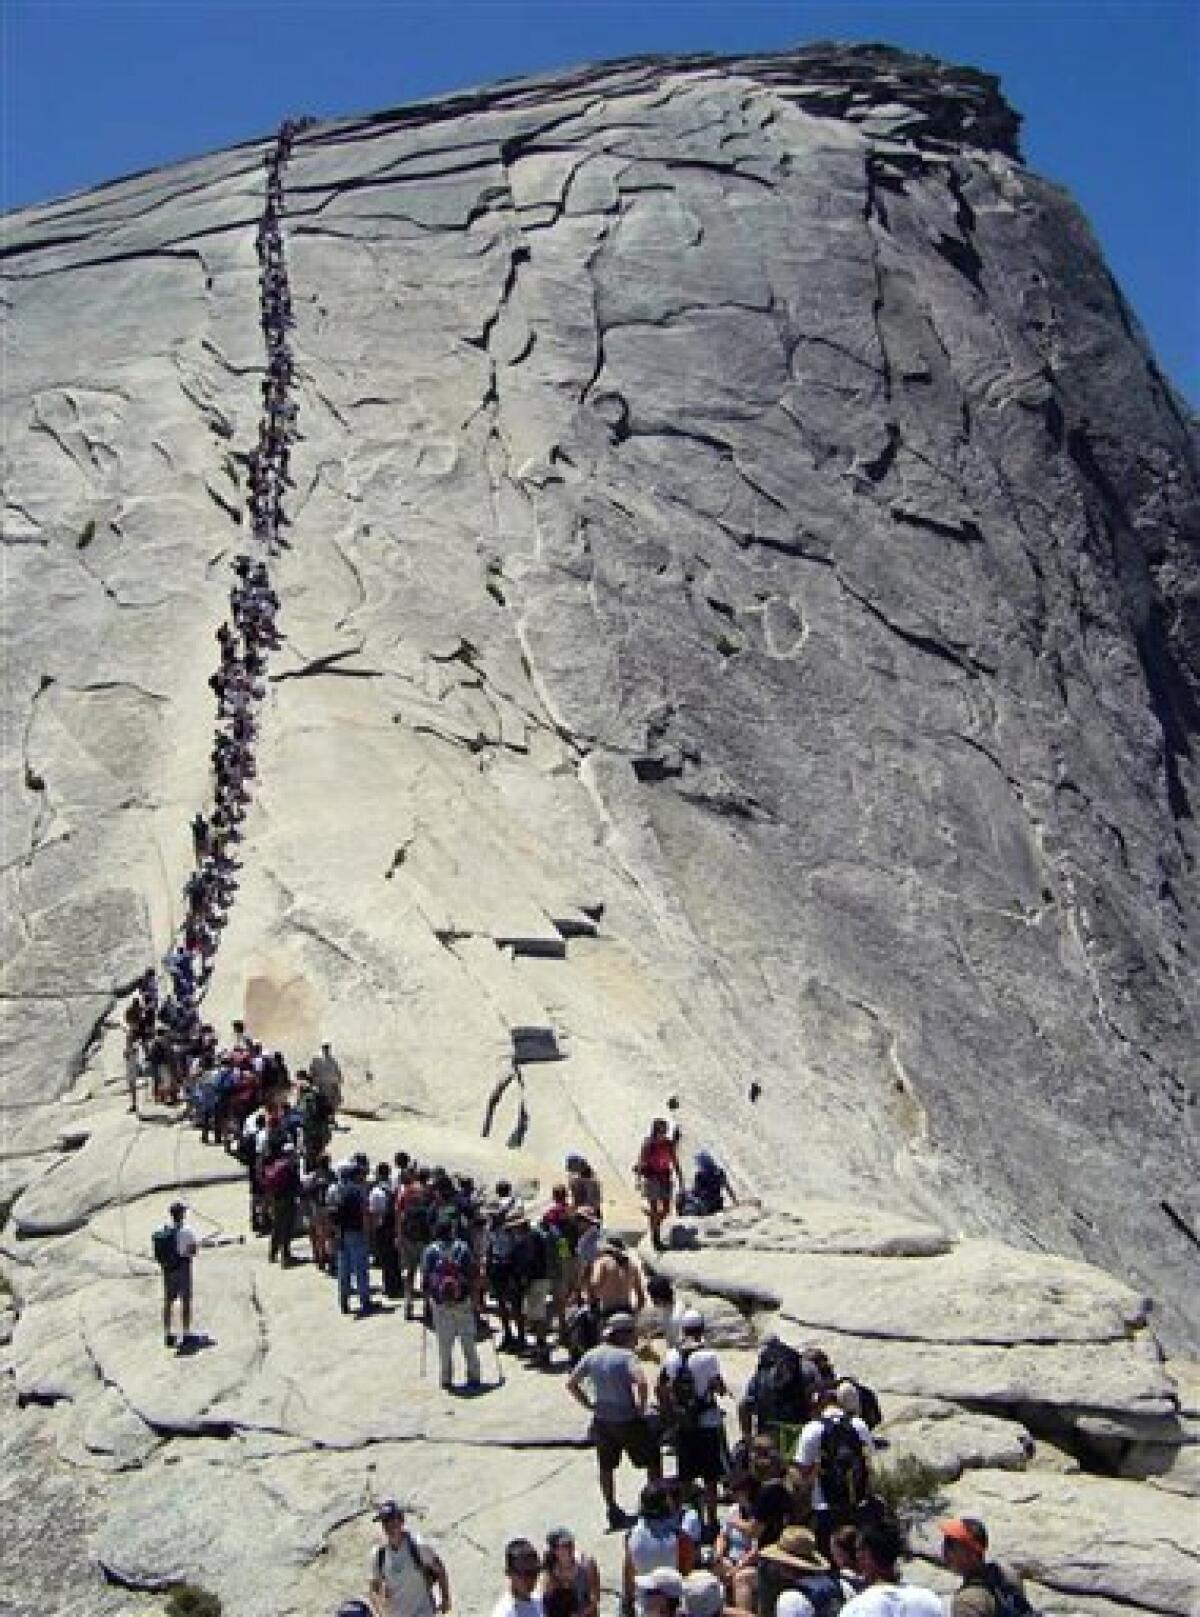 Yosemite plan means fewer hikers on Half Dome - The San Diego Union-Tribune